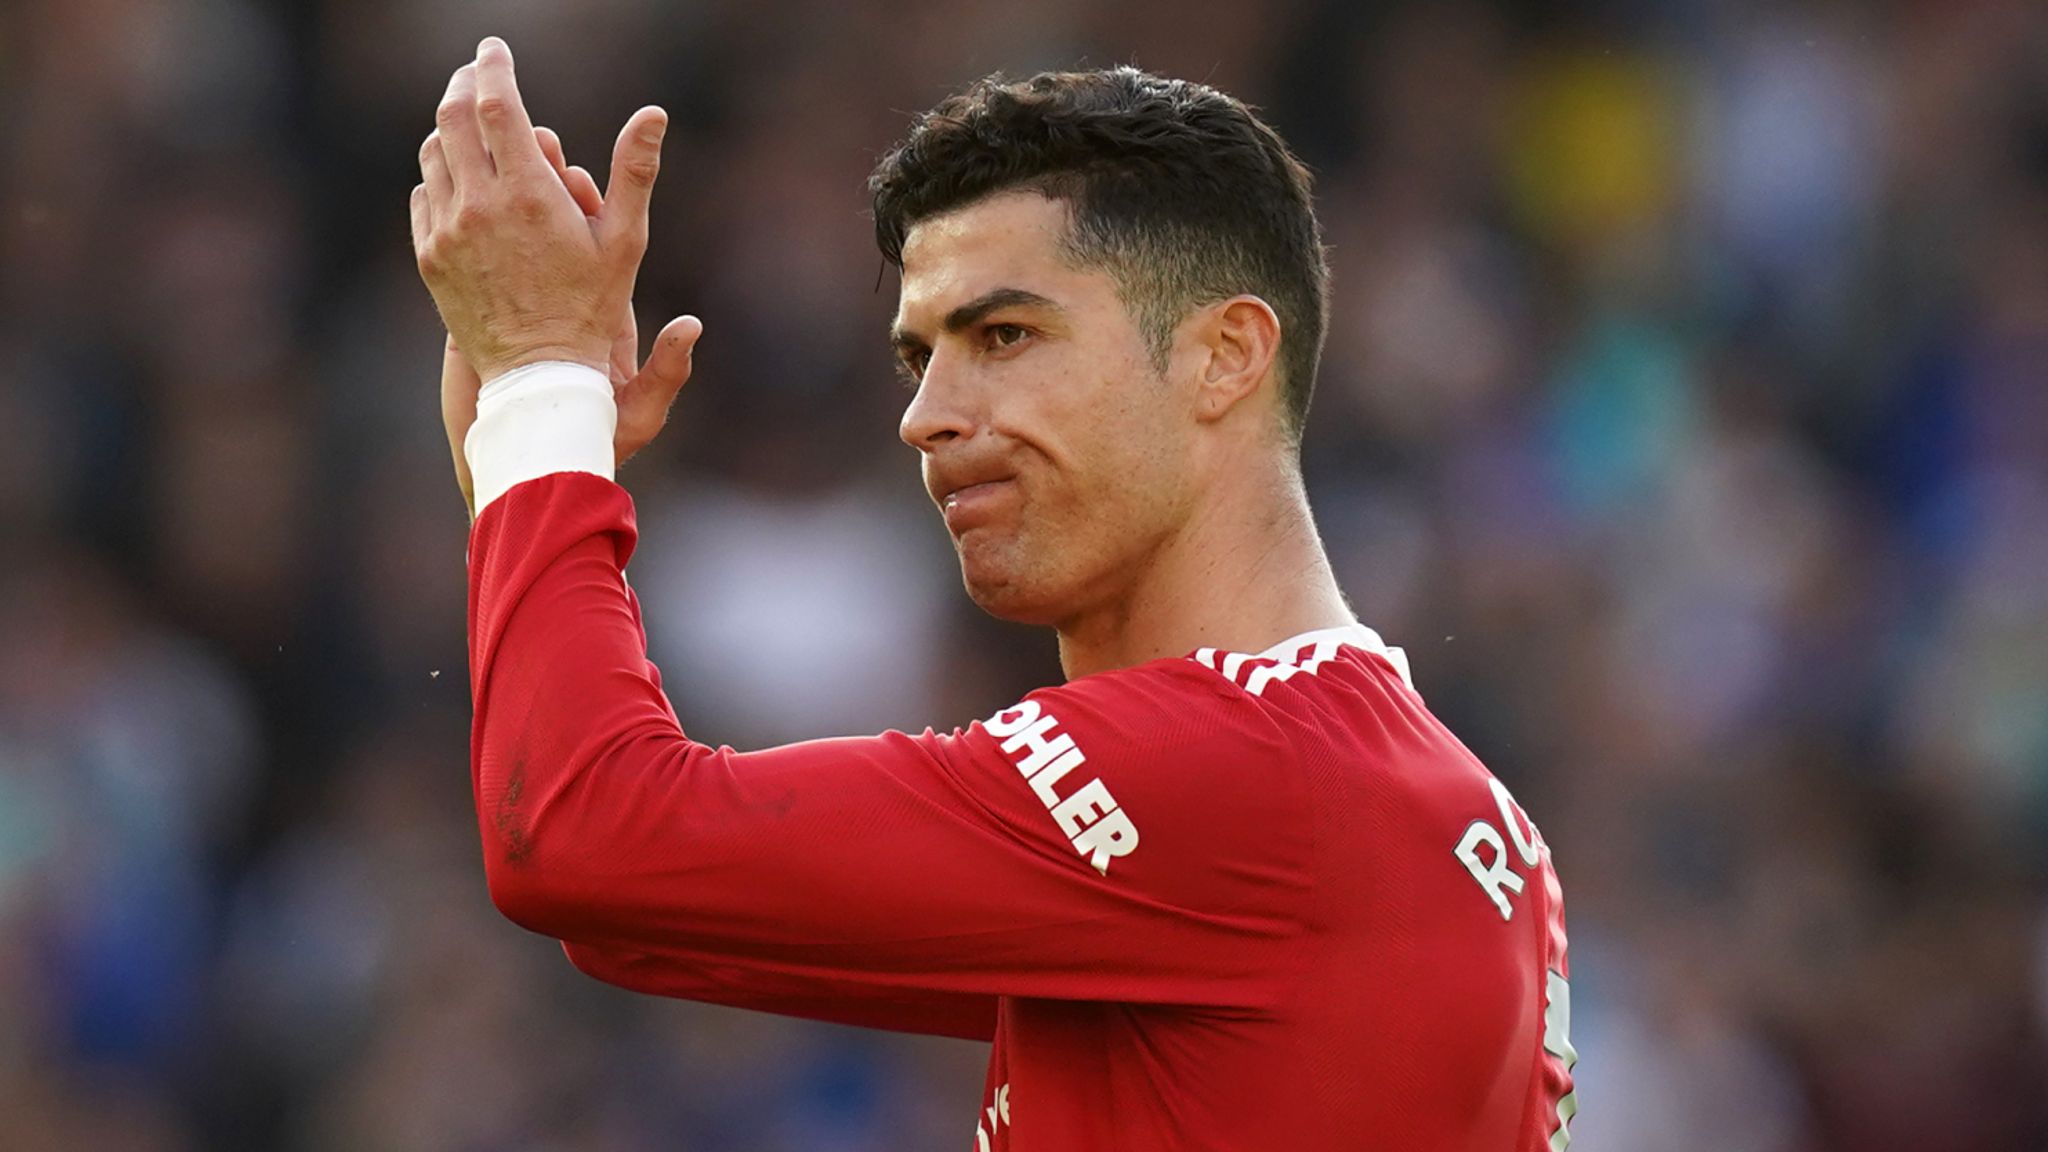 Cristiano Ronaldo to miss Manchester United's final-day clash at Crystal Palace with hip injury | Football News | Sky Sports